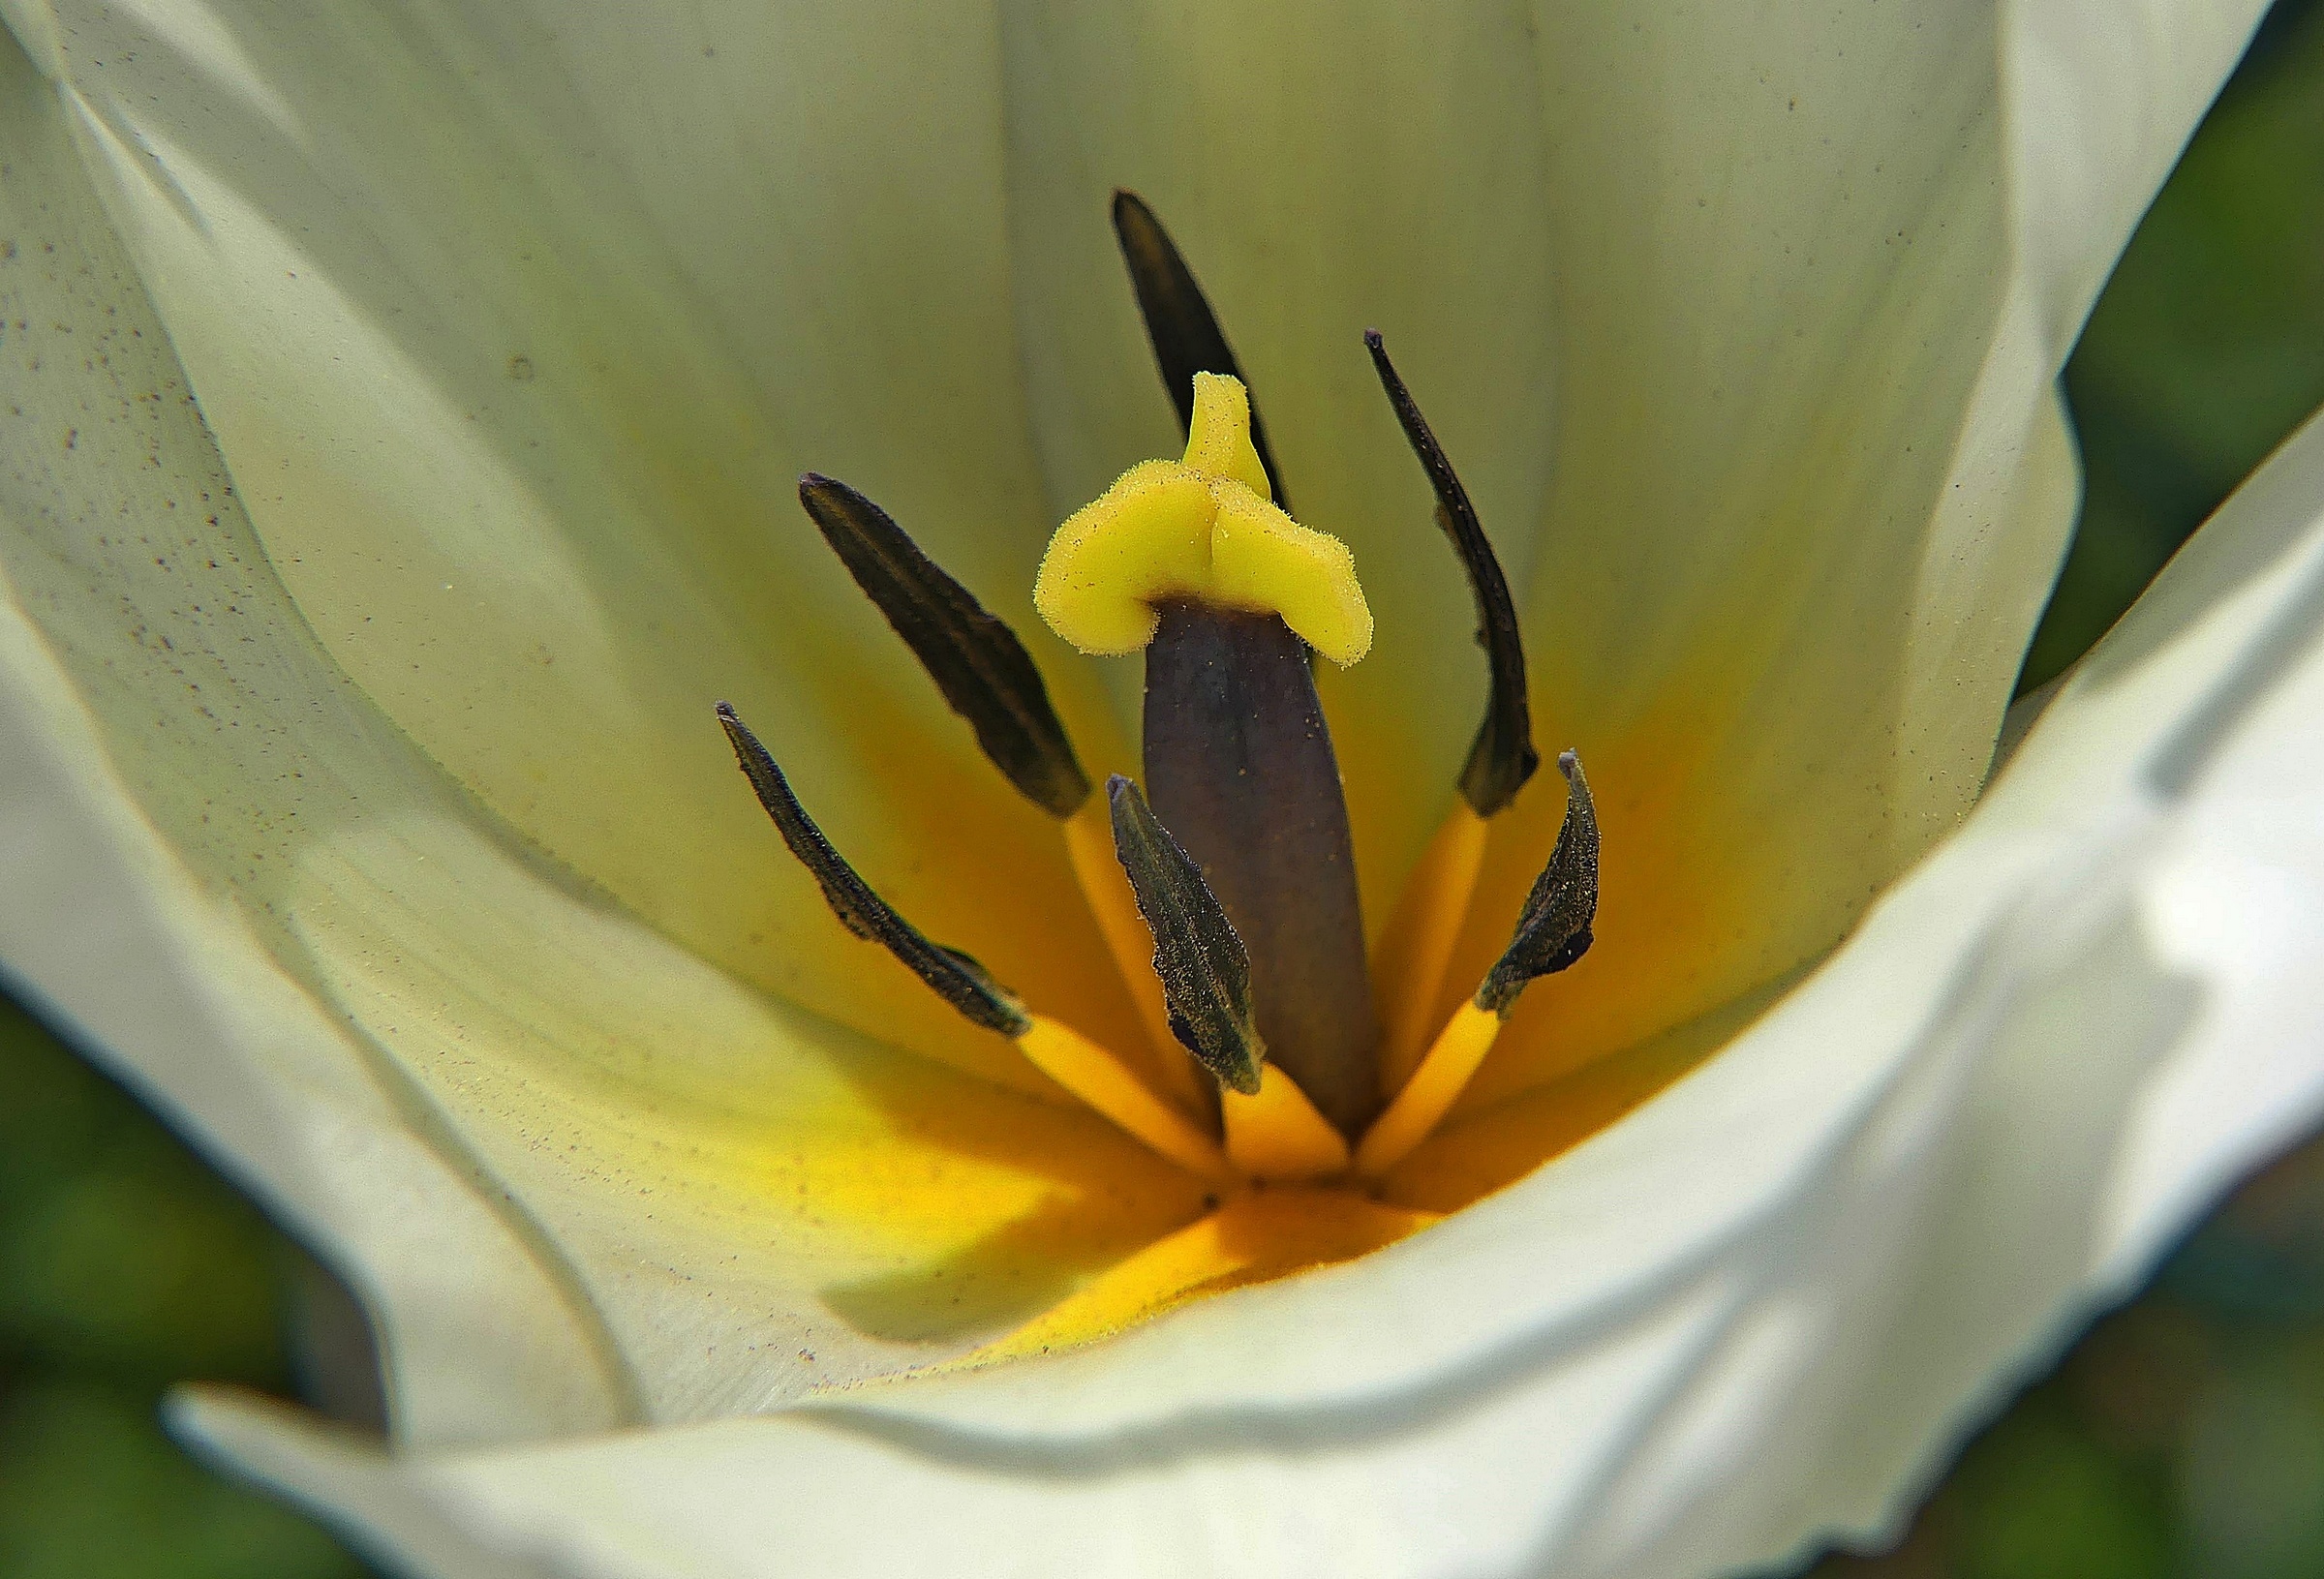 The heart of the tulip...